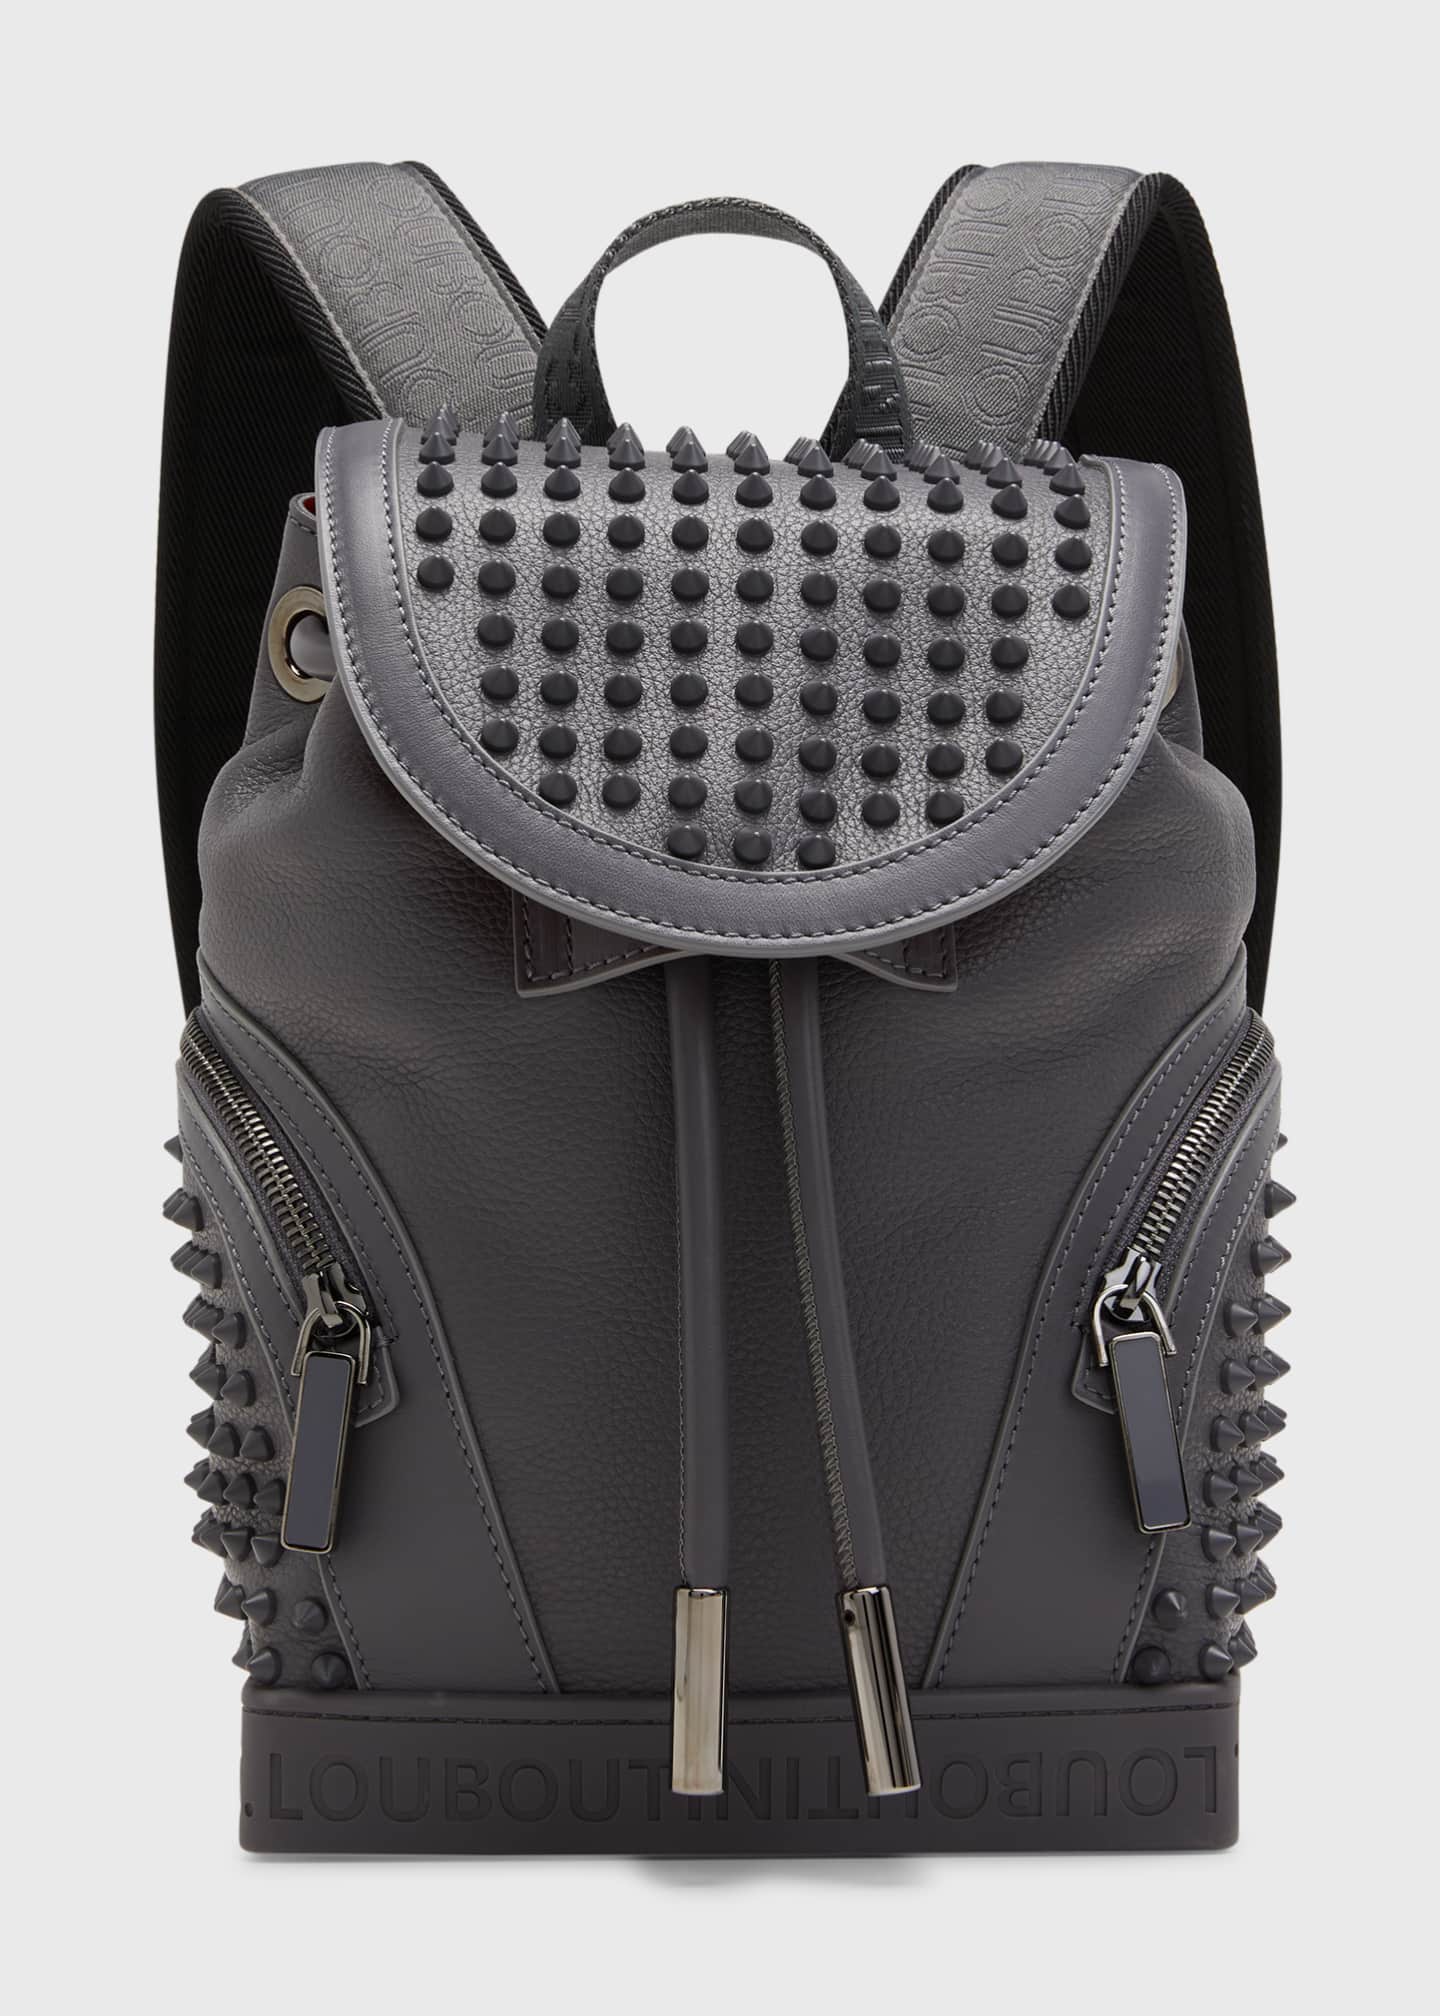 High quality goods Christian Louboutinmens Bags Explorafunk Studded